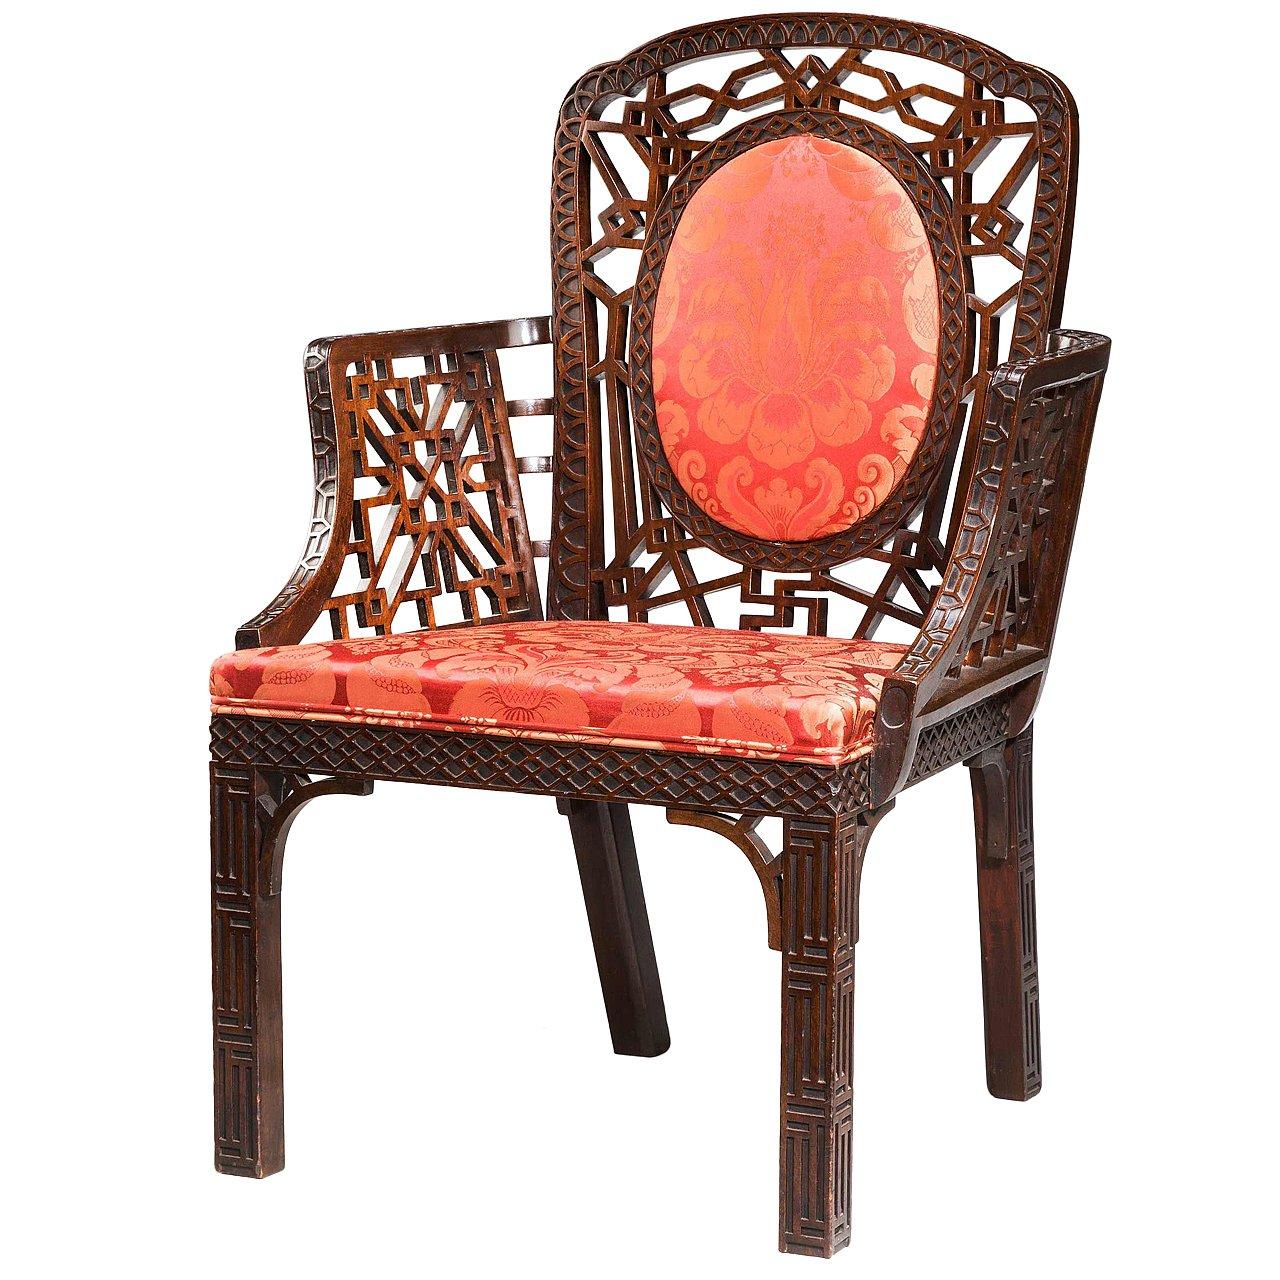 Chippendale Design Armchair. From the "Chinese Period"